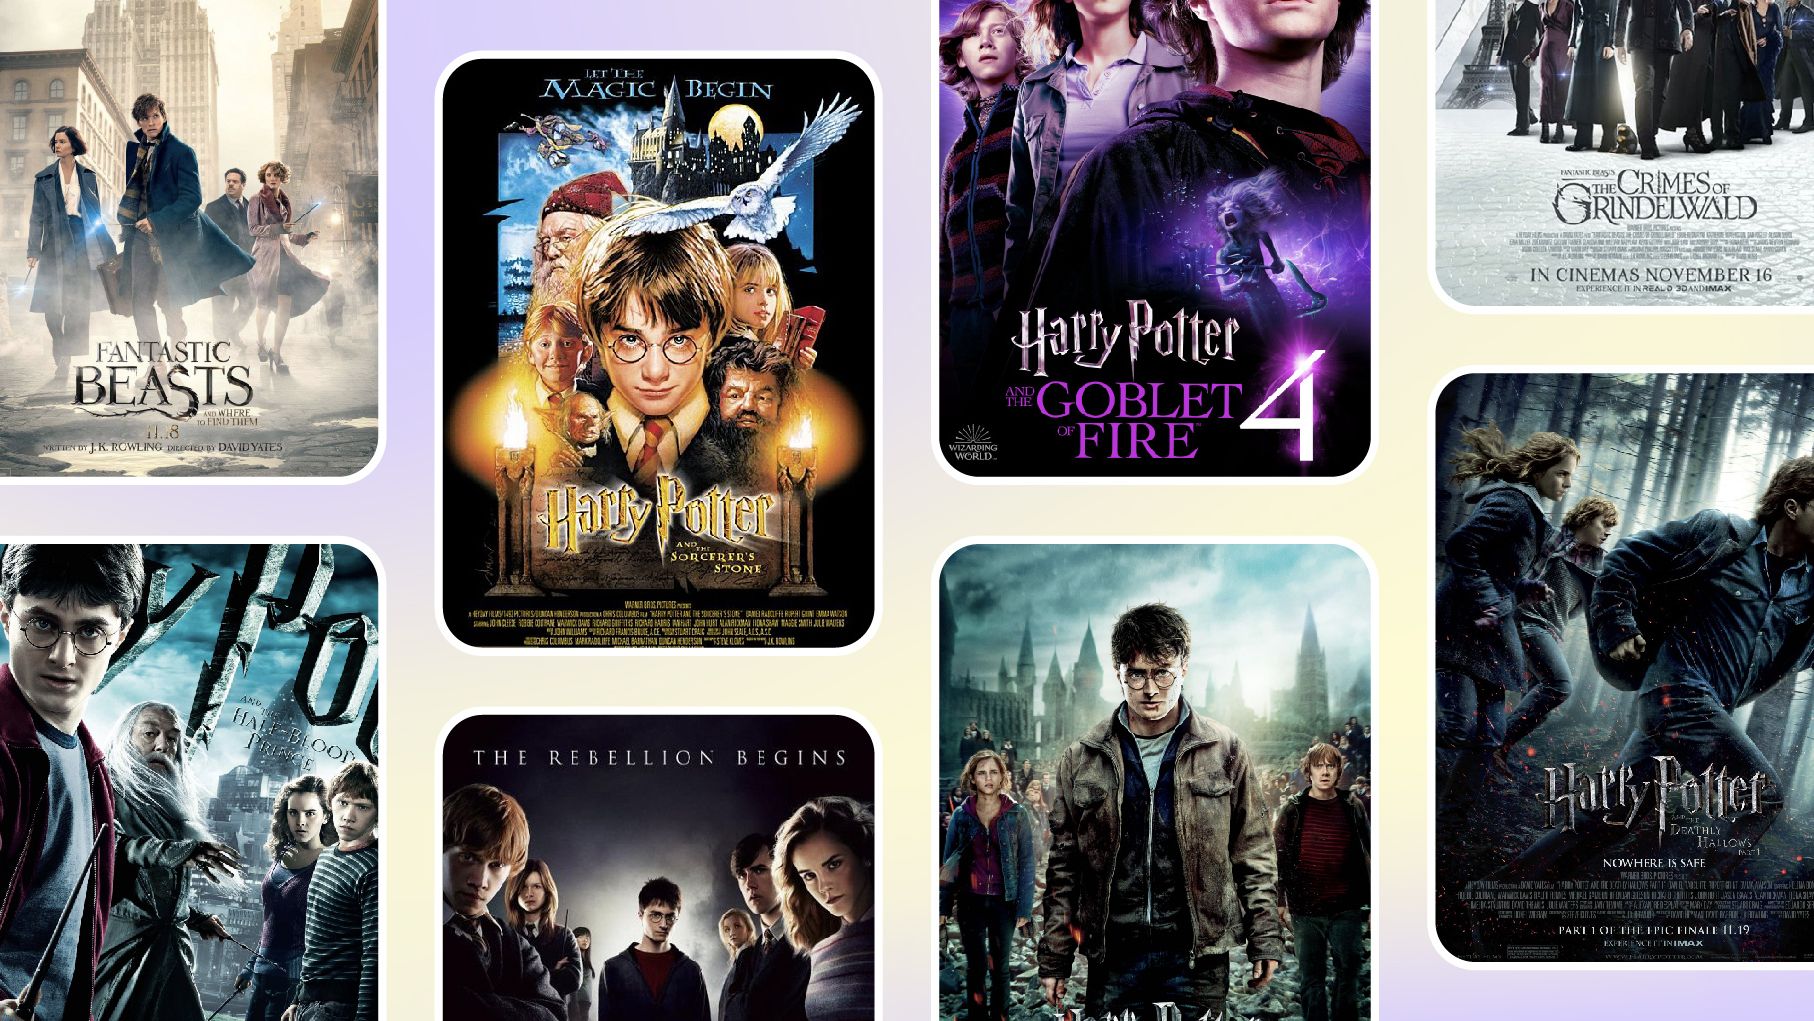 Harry Potter: 5 Things The Films Got Right About Harry (& 5 They